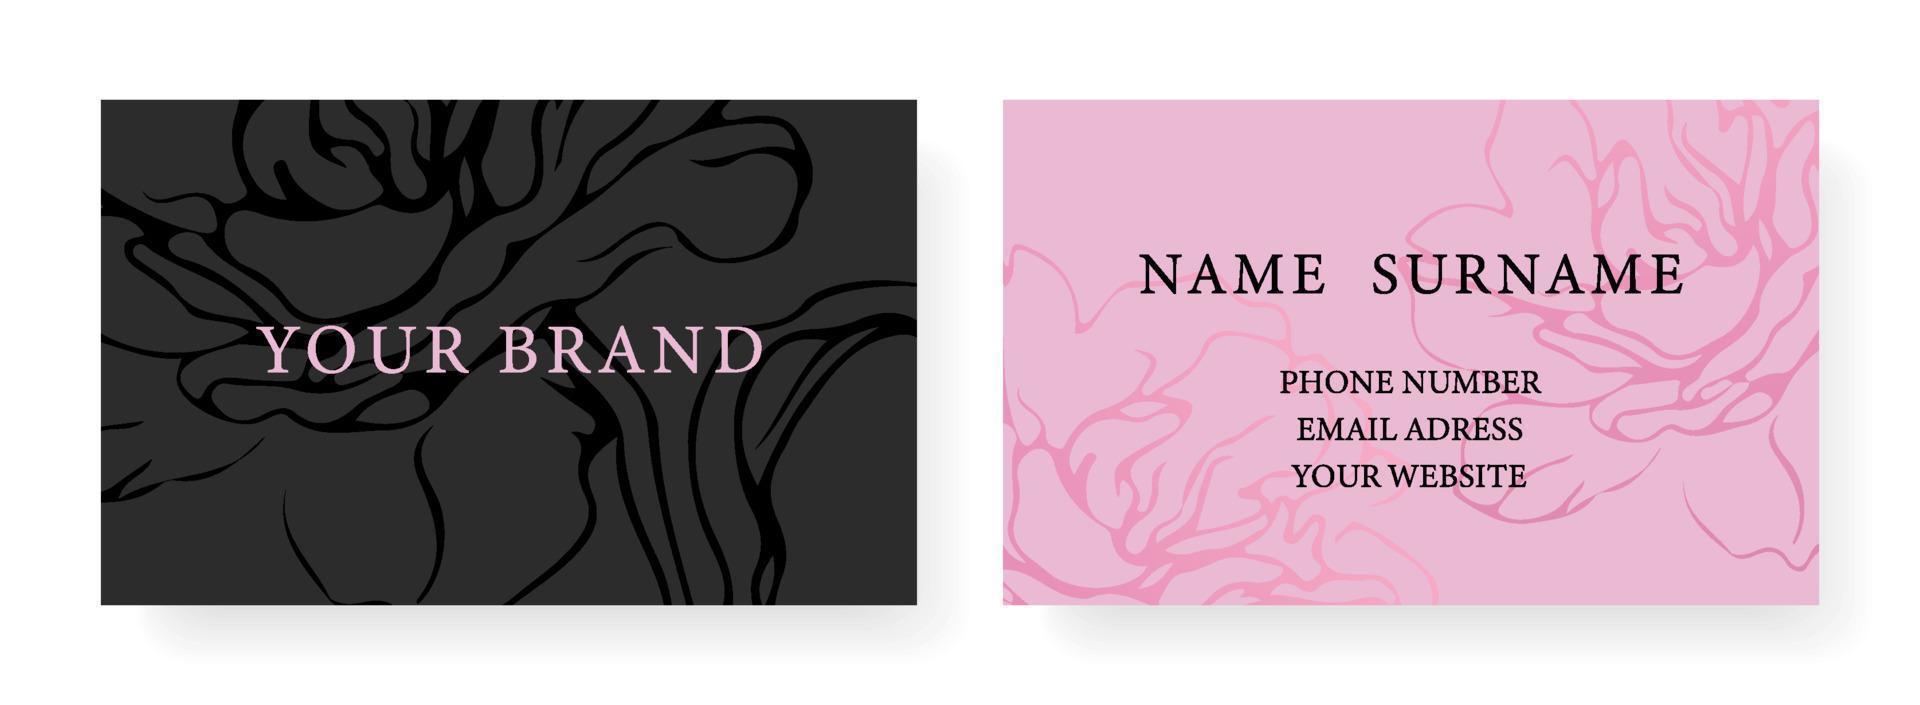 Business Card template design floral modern background for Luxury in soft pink colors . Vector template for banner, premium invitation, luxury voucher, prestigious gift certificate.